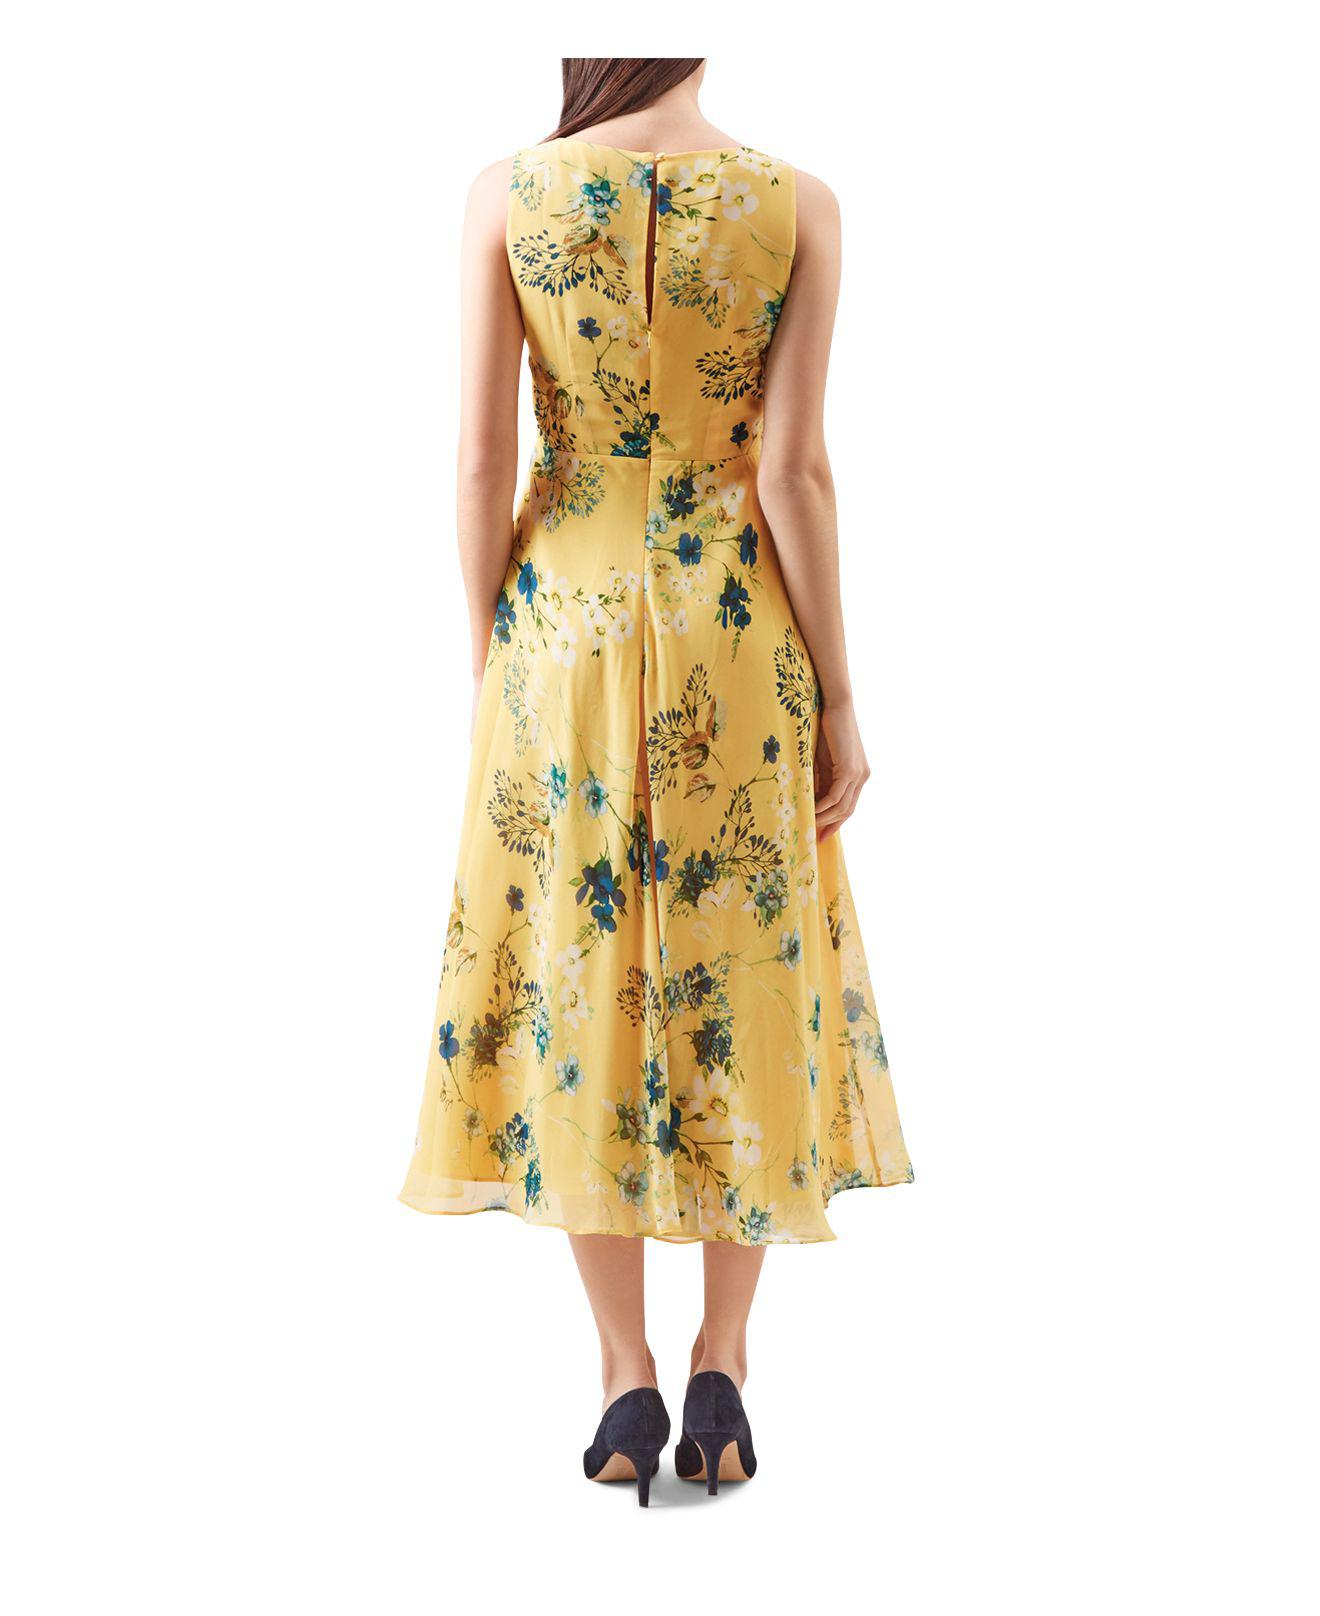 Hobbs Carly Floral Print Midi Dress in Yellow | Lyst